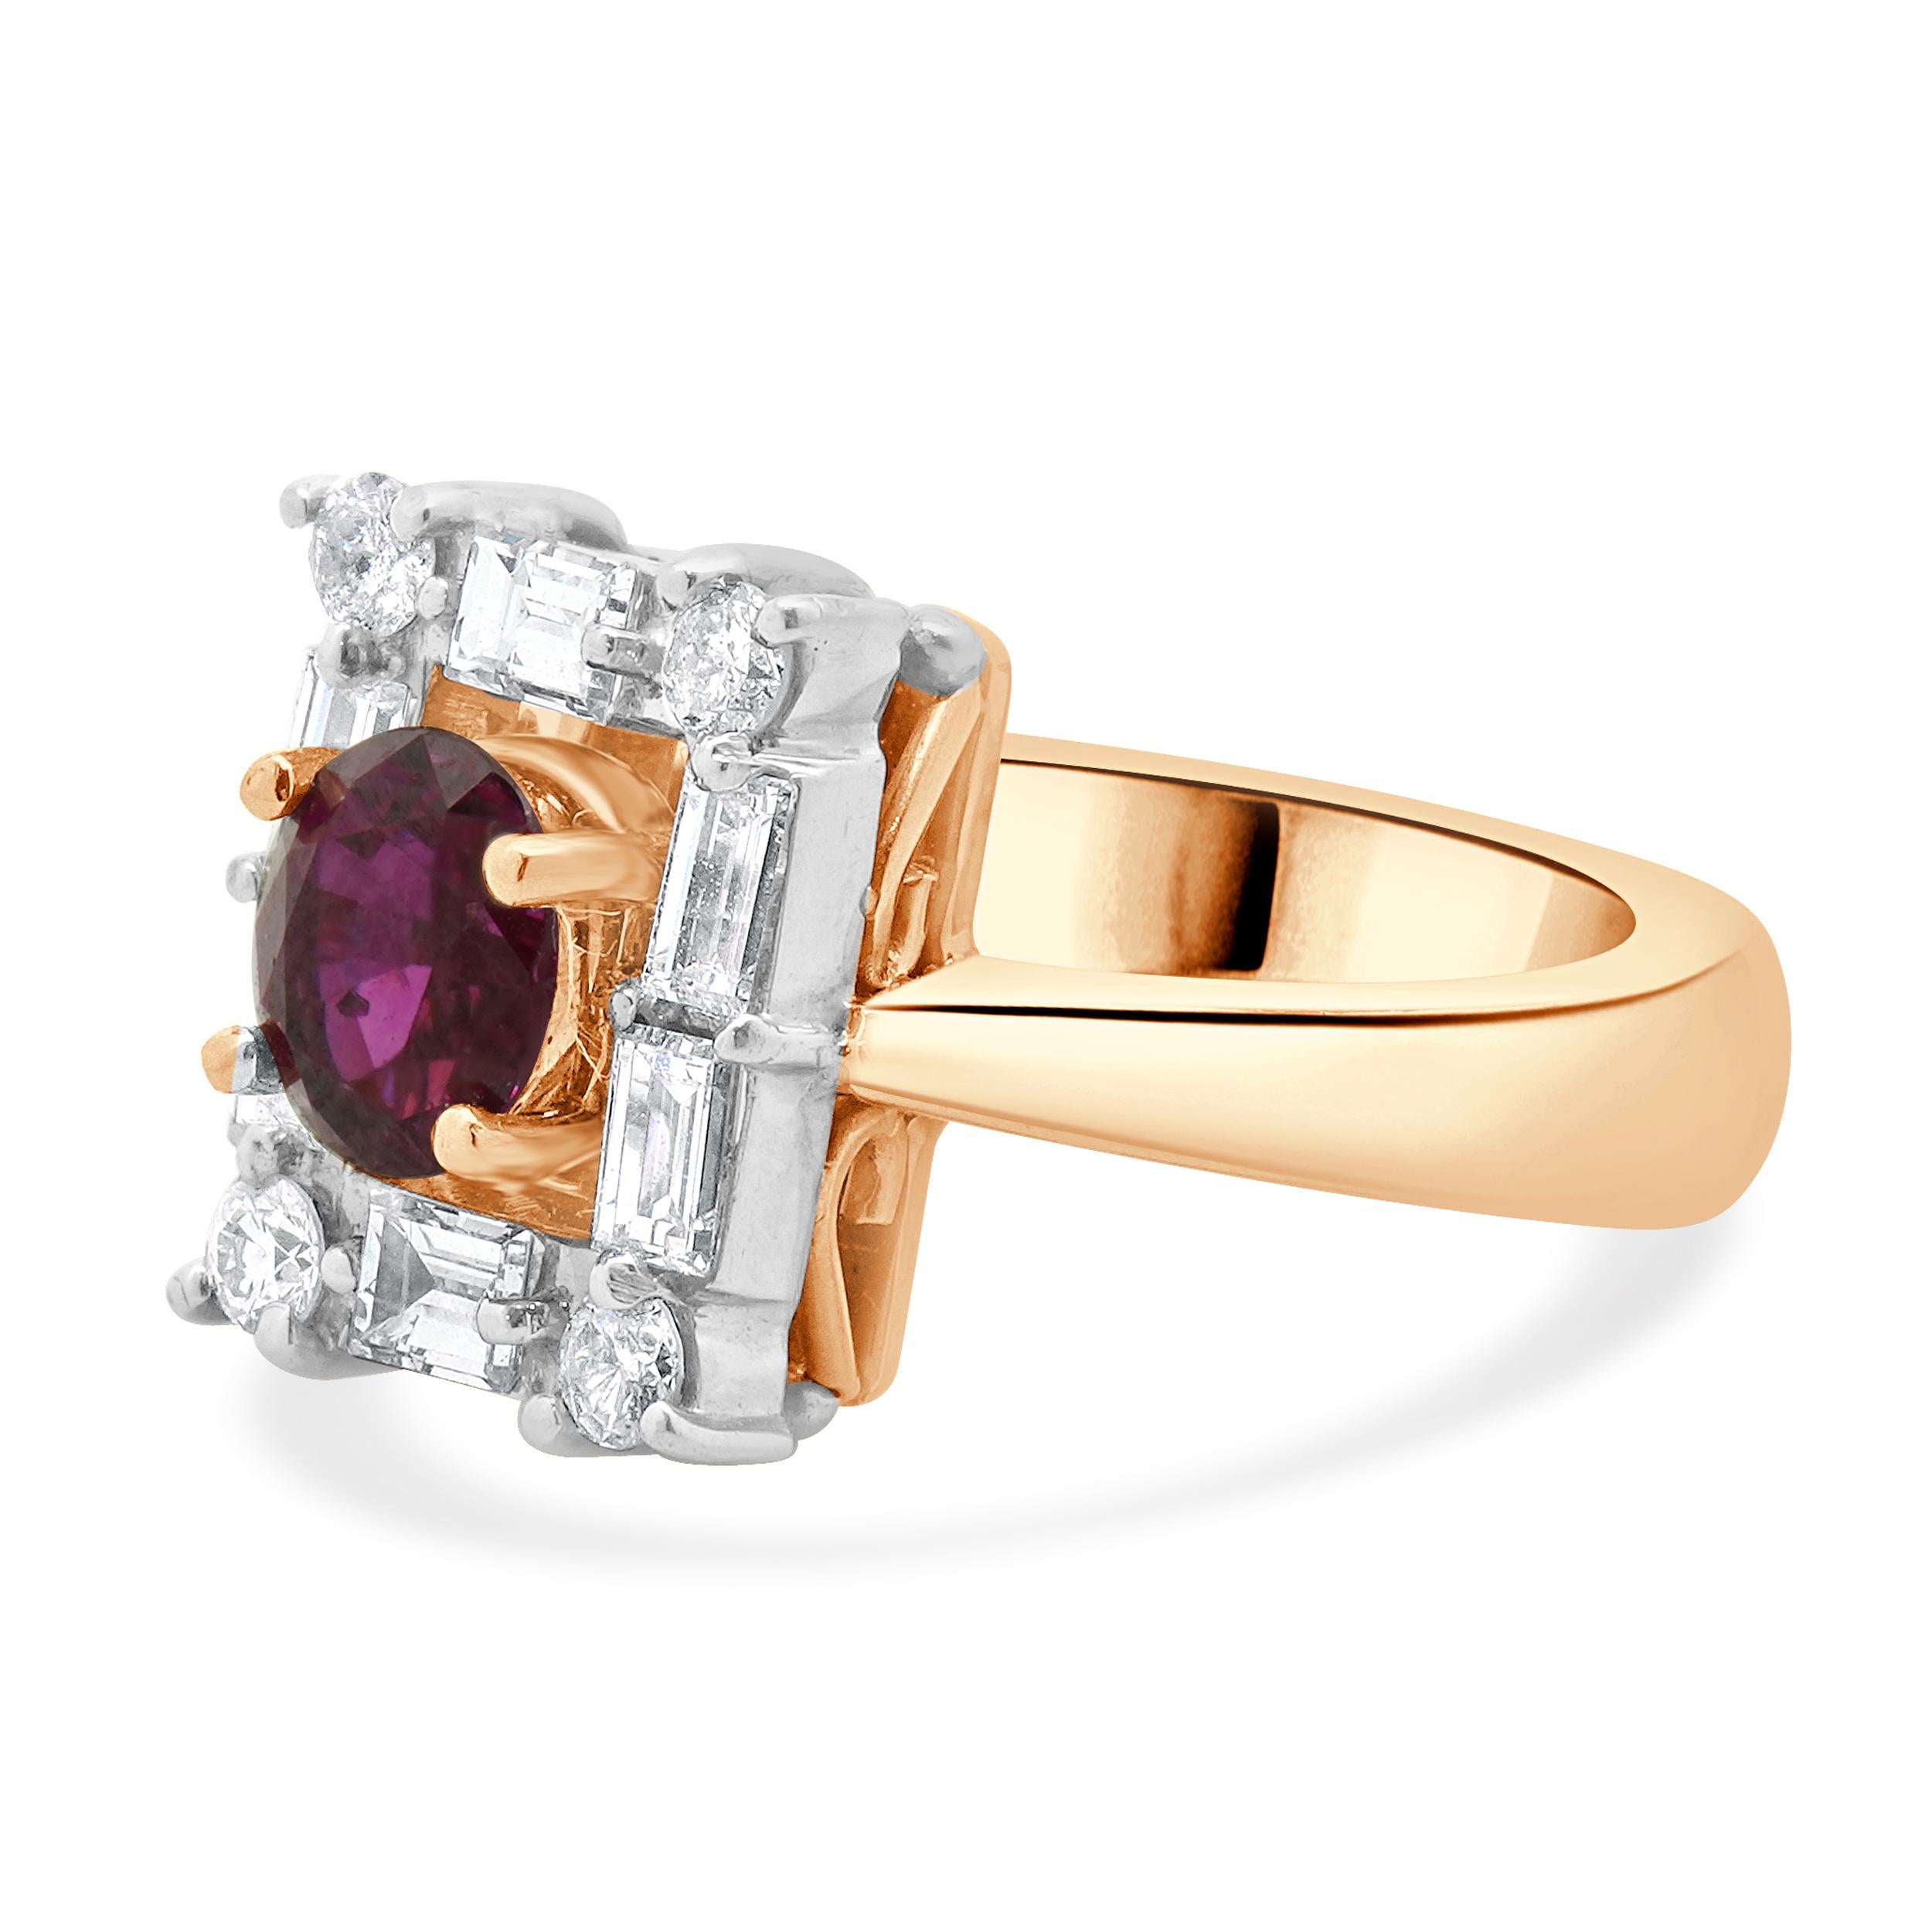 Designer: custom
Material: 14K rose gold
Diamond:  round and emerald cut = 1.73cttw
Color: G
Clarity: SI1
Oval Ruby:  4.10cttw
Ring Size: 7 (please allow two extra shipping days for sizing requests) 
Weight: 11.49 grams
